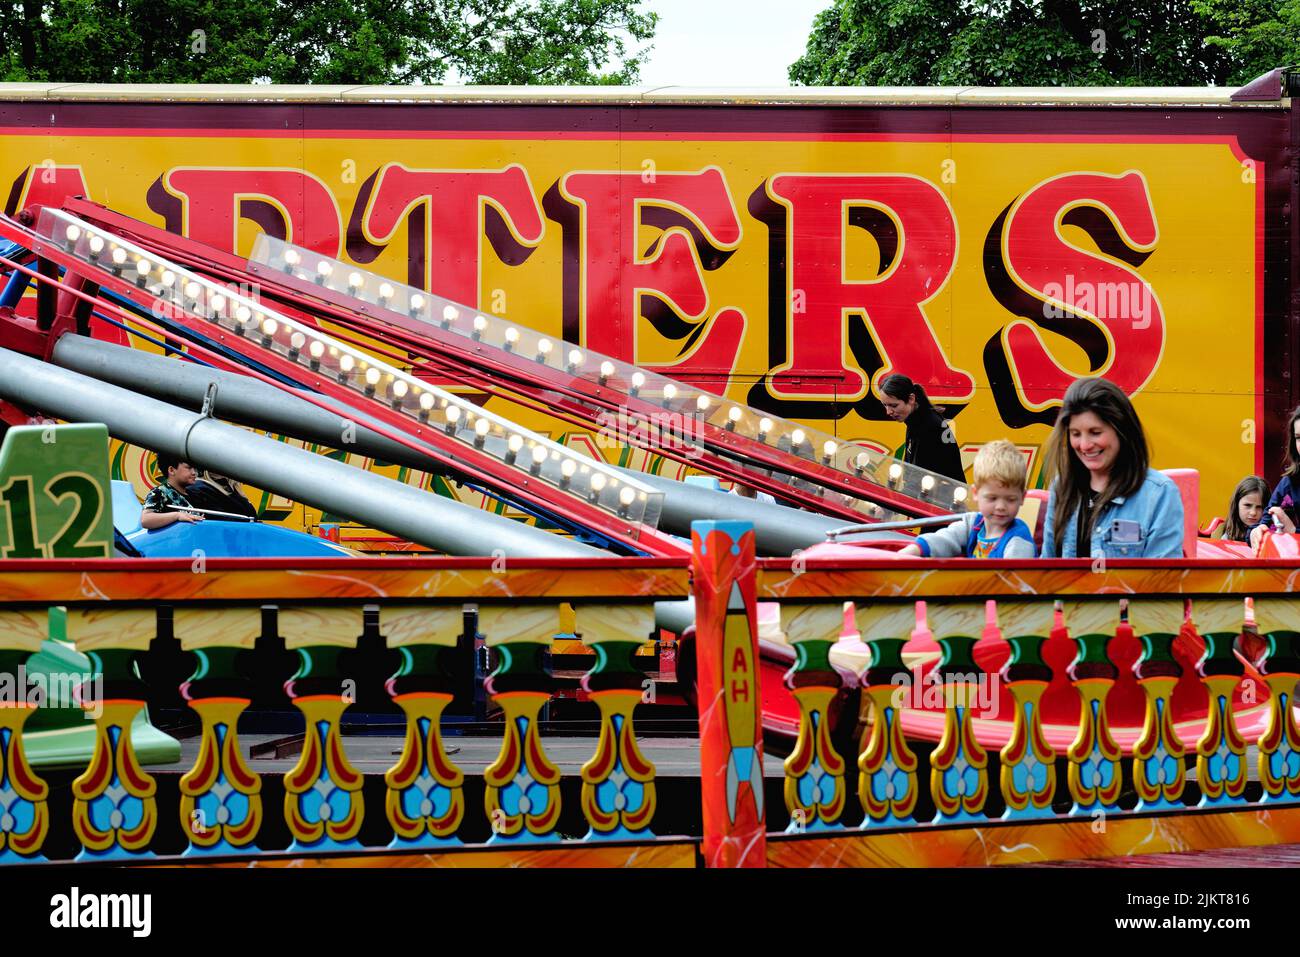 The traditional and colourful Carters Steam Fair being enjoyed by crowds on a summers day in Surrey England UK Stock Photo